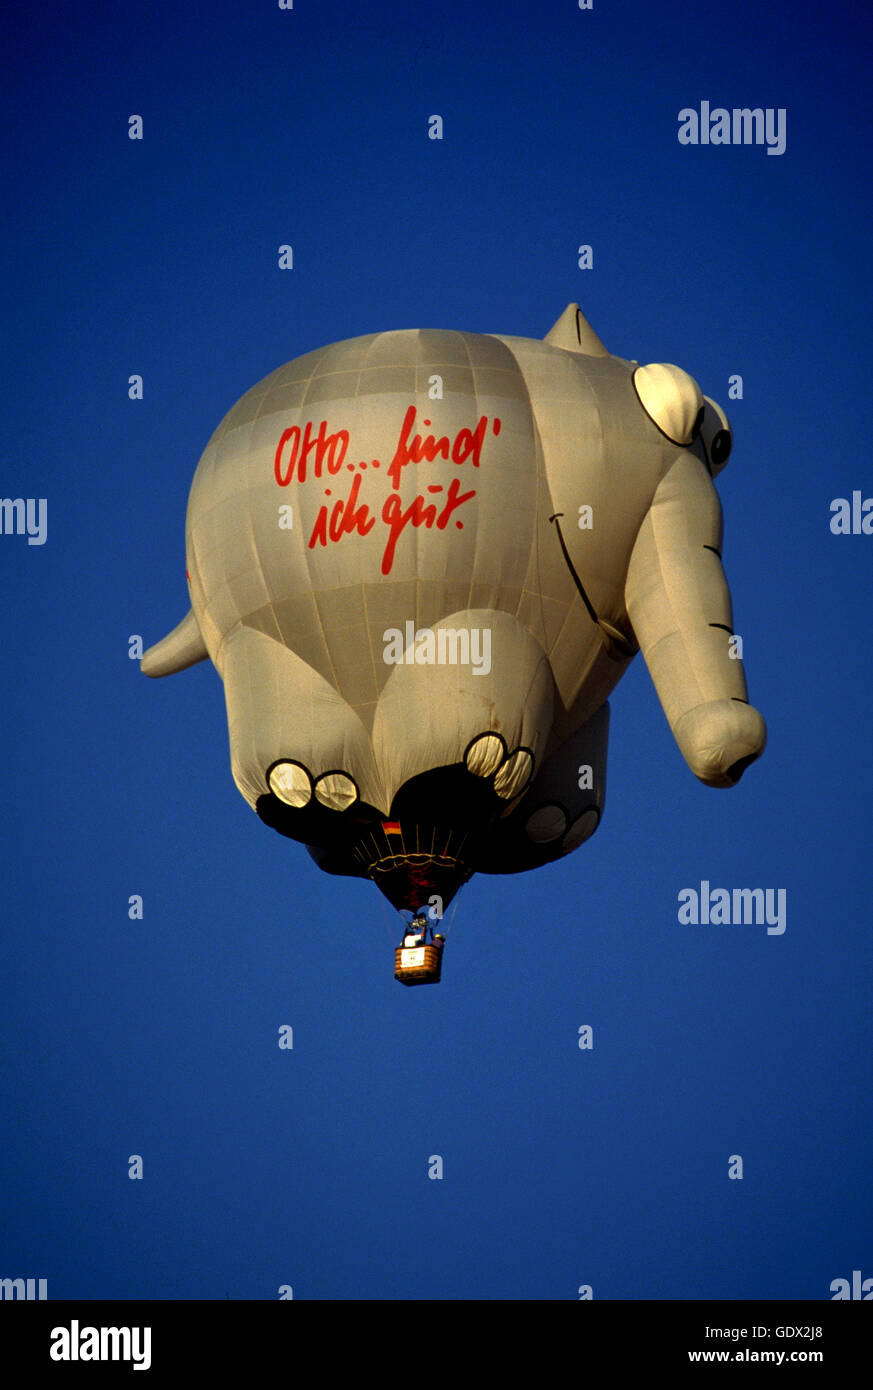 The German Otto the Oliphont elephant special shape hot air balloon at  the Albuquerque International Balloon Fiesta. New Mexic Stock Photo - Alamy